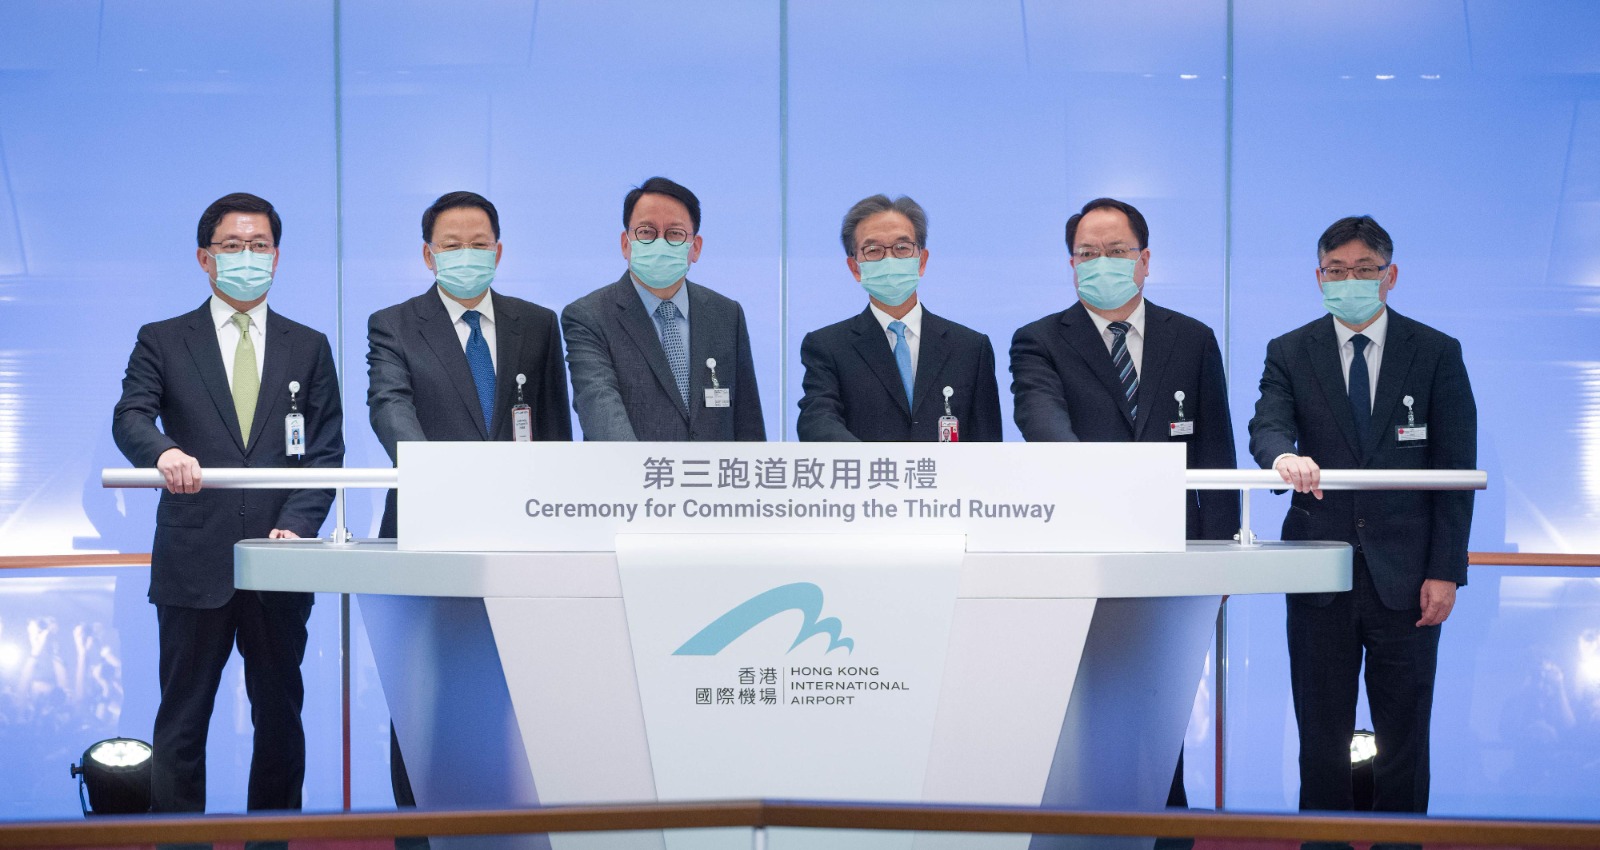 Photo shows (from left) the Chief Executive Officer of the Airport Authority Hong Kong(AAHK), Mr Fred Lam; Deputy Director of the Liaison Office of the Central People's Government in the Hong Kong Special Administrative Region (HKSAR) Mr Yin Zonghua; the Chief Secretary for Administration, Mr Chan Kwok-ki; the Chairman of the AAHK, Mr Jack So; Deputy Commissioner of the Office of the Commissioner of the Ministry of Foreign Affairs of the People's Republic of China in the HKSAR Mr Pan Yundong; and me, officiating at the Ceremony for the Commissioning of the Third Runway of Hong Kong International Airport yesterday.